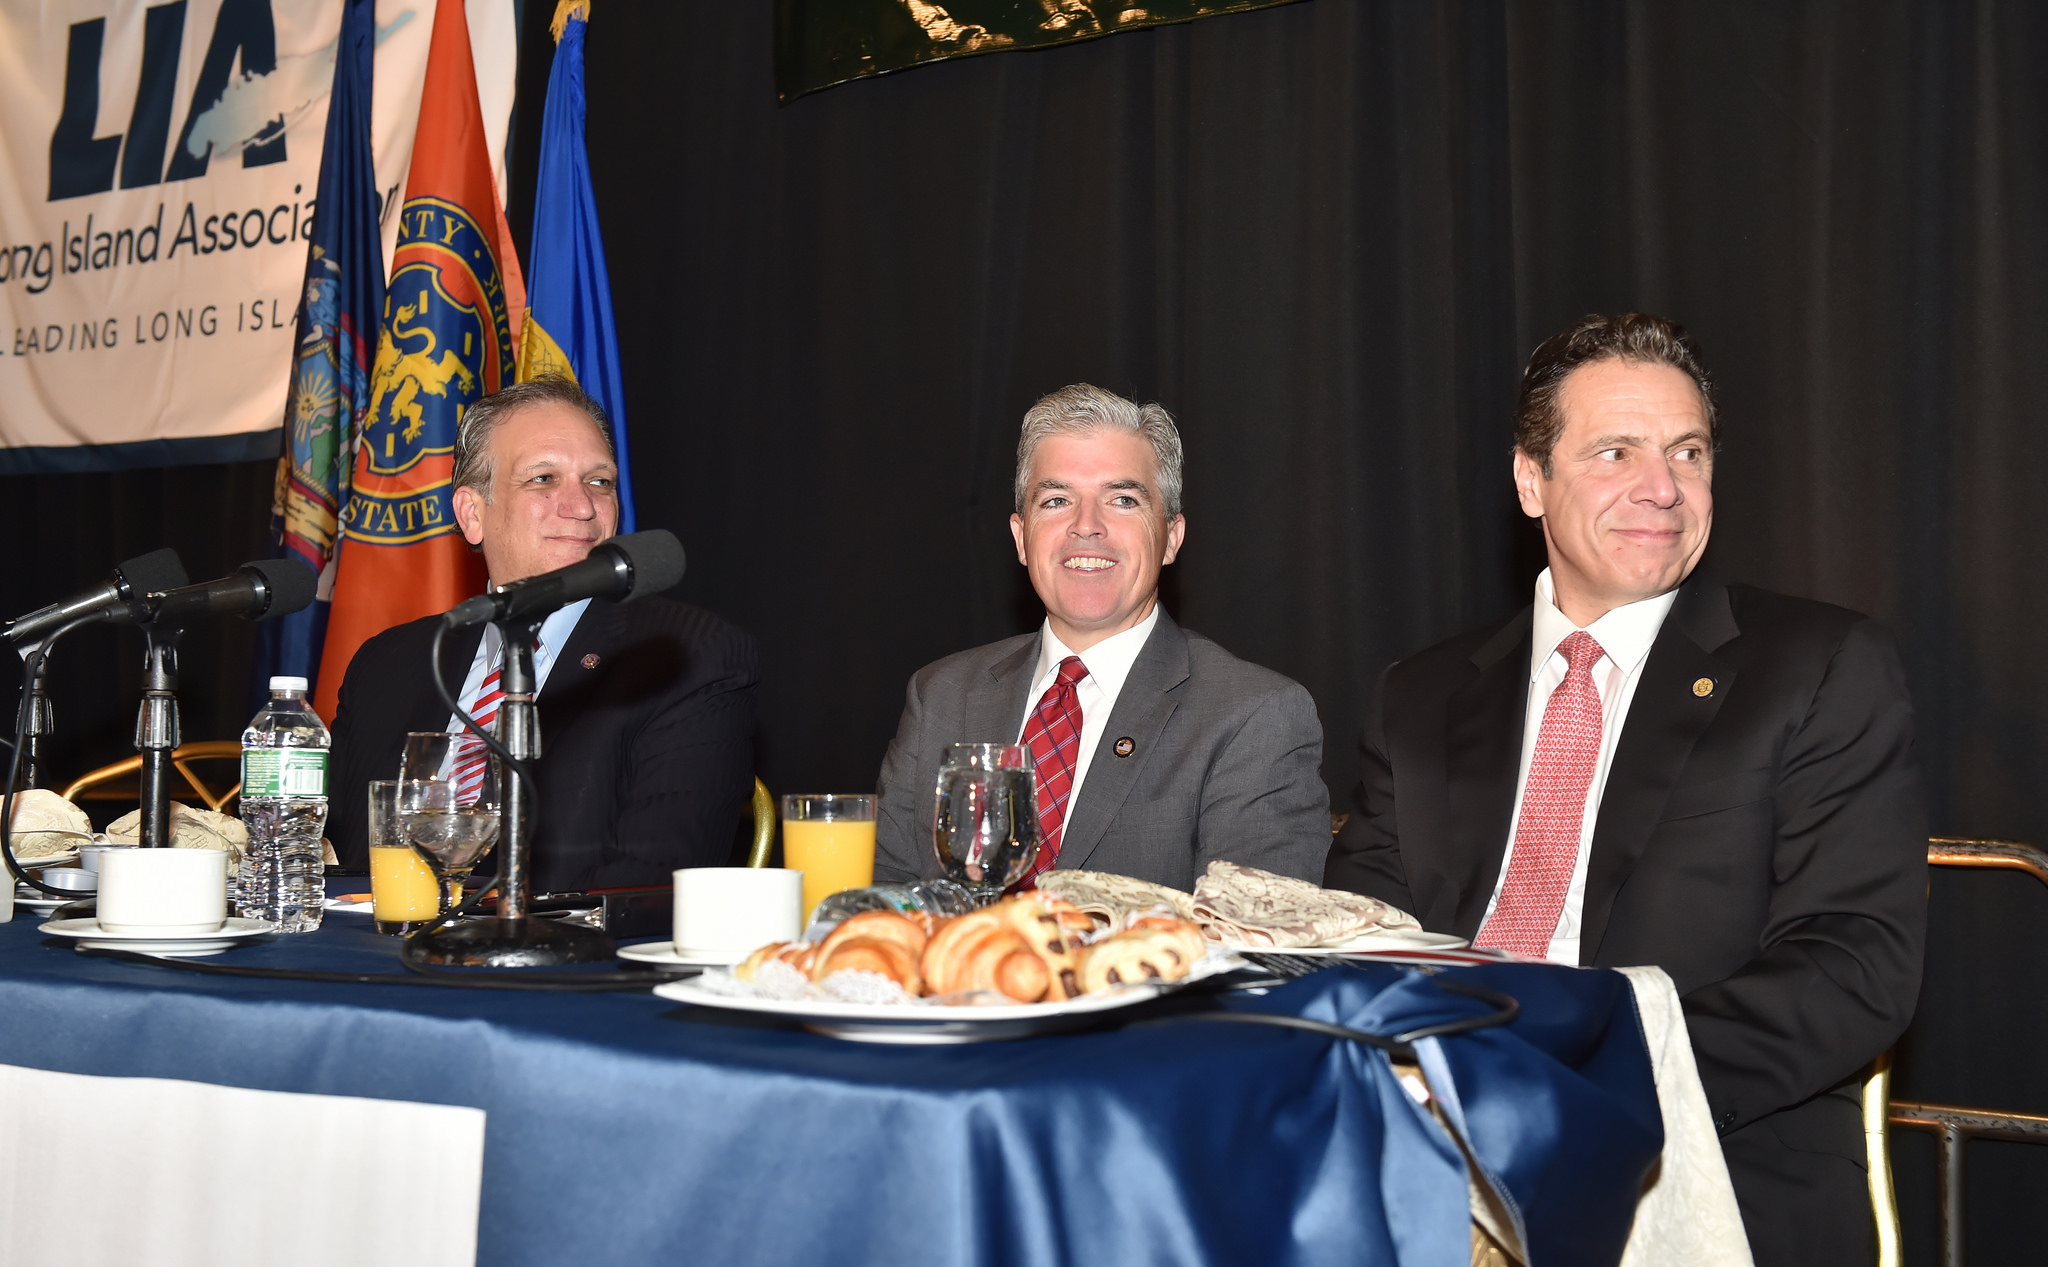 Nassau County Executive Ed Mangano (left) and his counterpart in Suffolk, Steve Bellone (center), join Gov. Andrew Cuomo at a breakfast unveiling the governor's 2016 agenda.  (Photo credit: Kevin P. Coughlin/Office of the Governor)